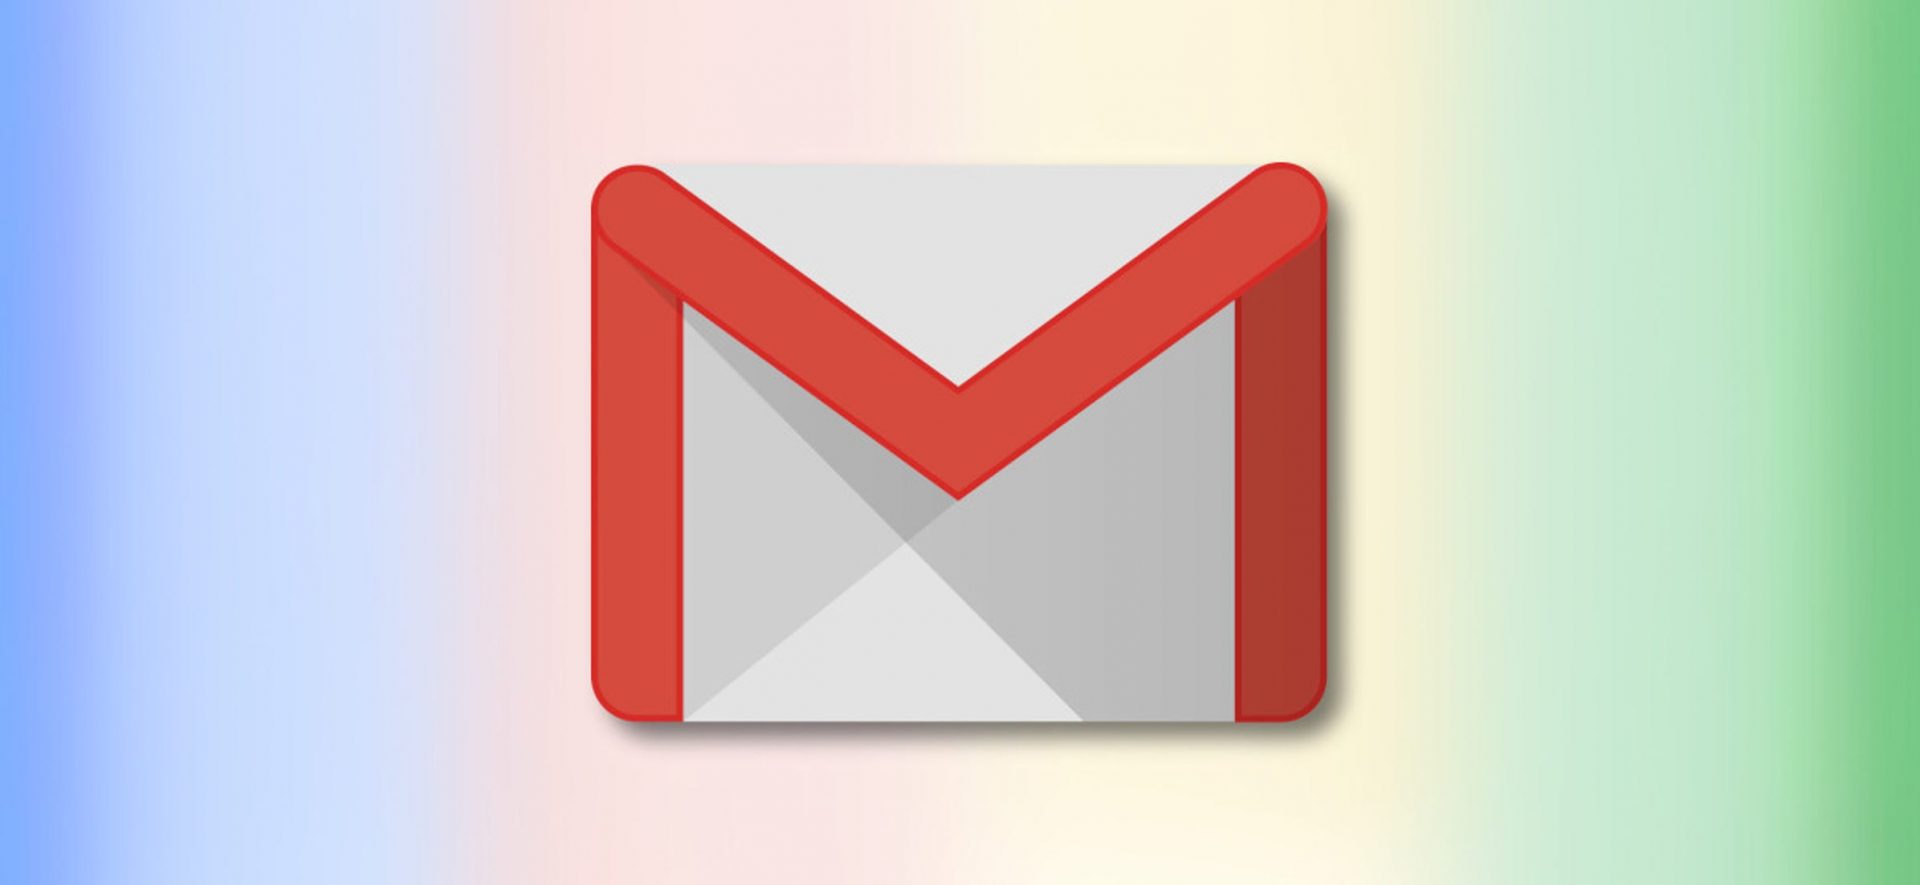 The explicit solution to Turn off Excellent-trying Respond and Excellent-trying Produce Aspects in Gmail